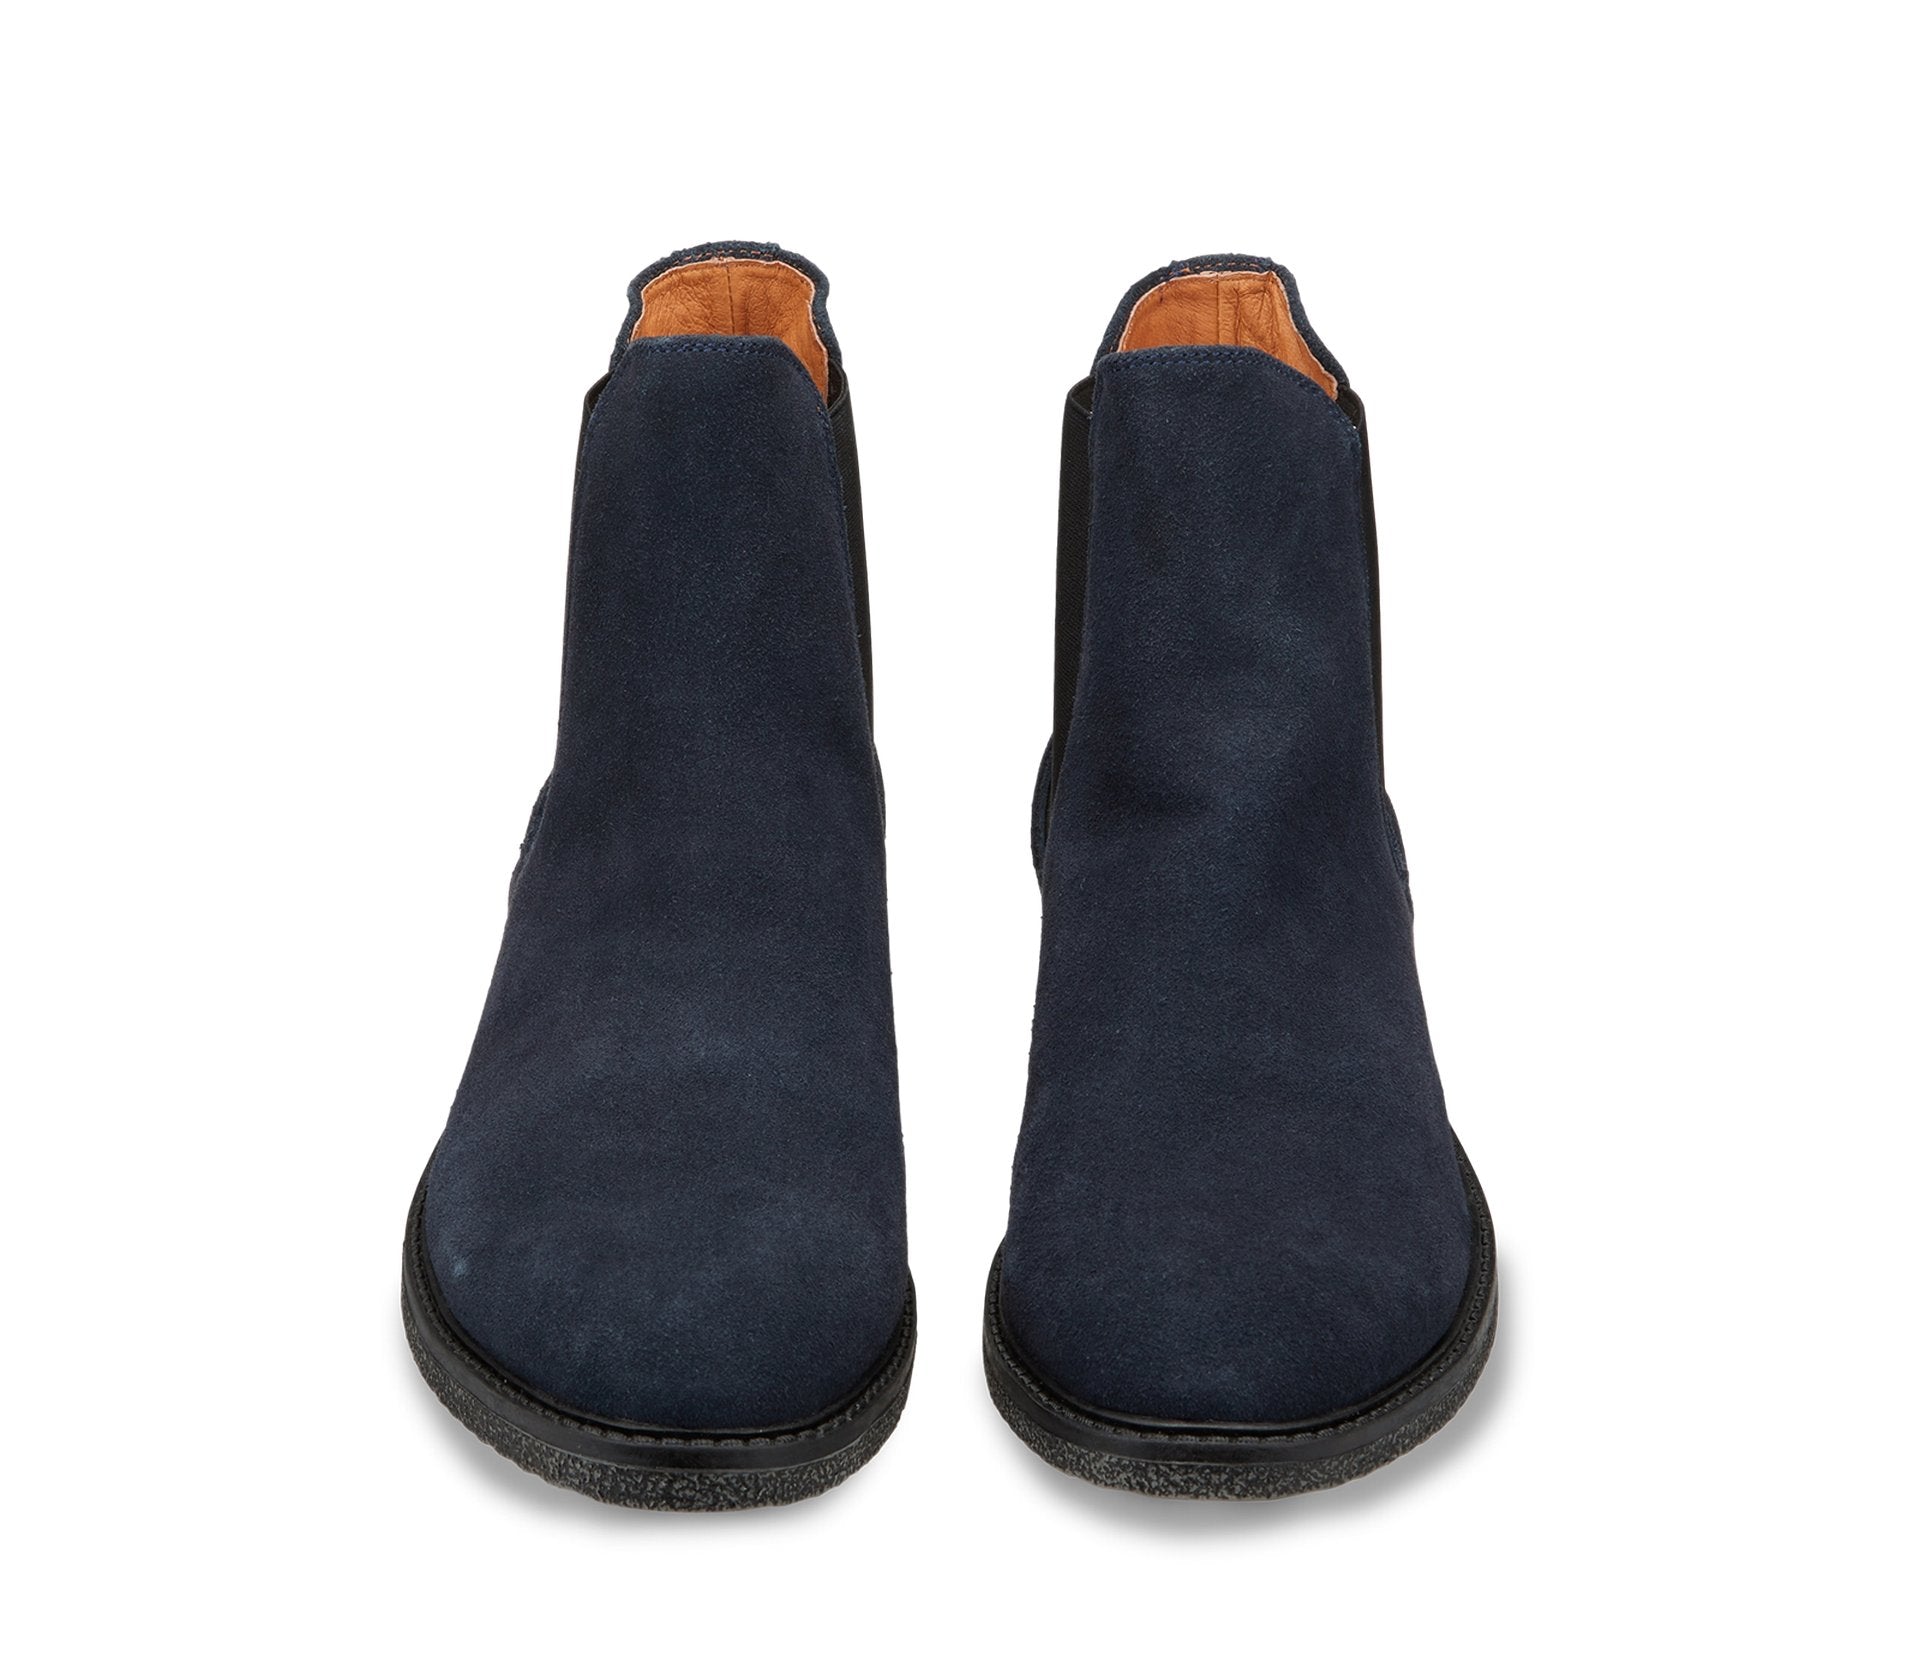 Blue Men's Chelsea Ankle Boots in Suede Leather with Elasticized Inserts